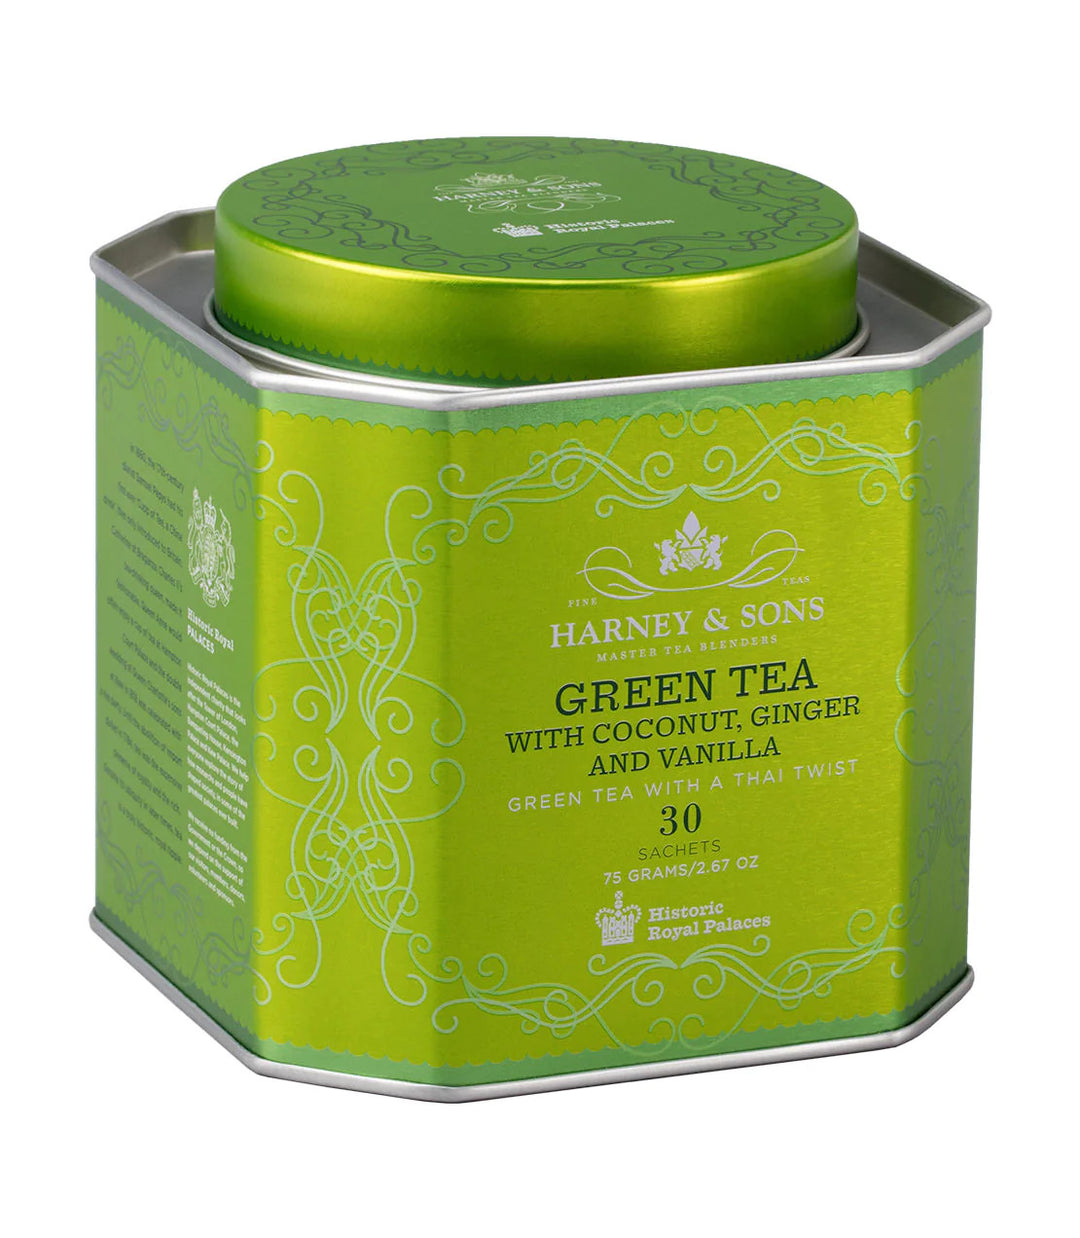 Green Tea with Coconut, Ginger & Vanilla by Harney & Sons.